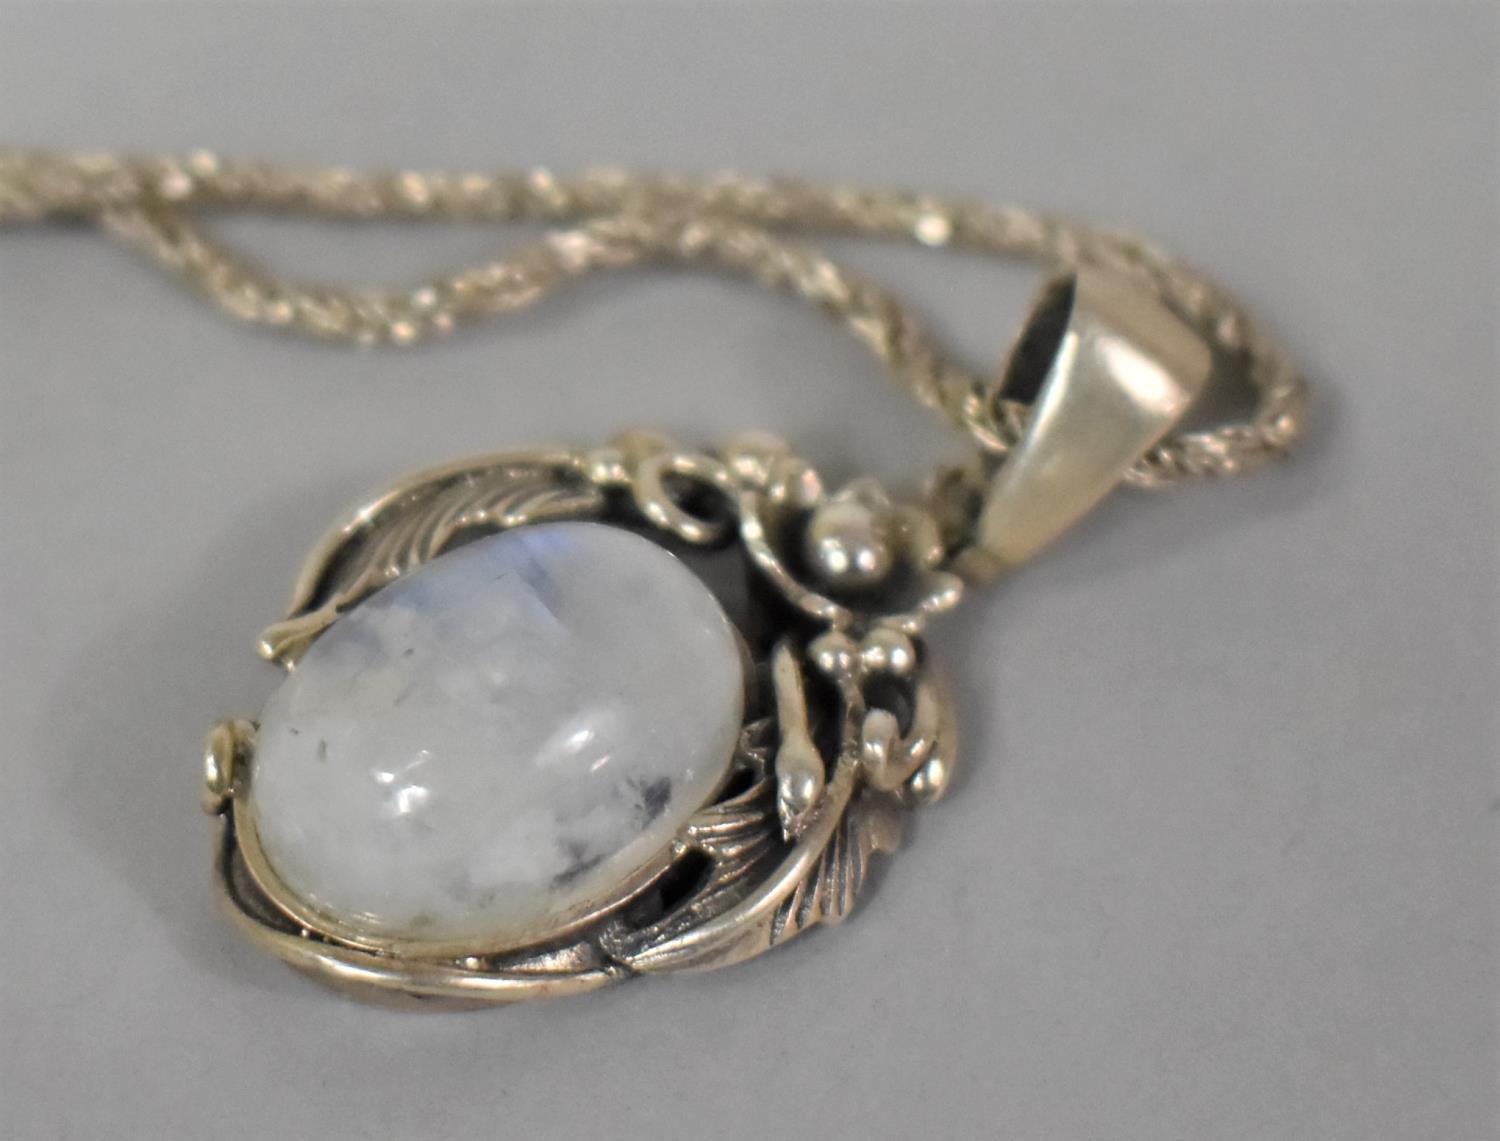 A Silver and Moonstone Mounted Pendant on 54" Chain - Image 2 of 2